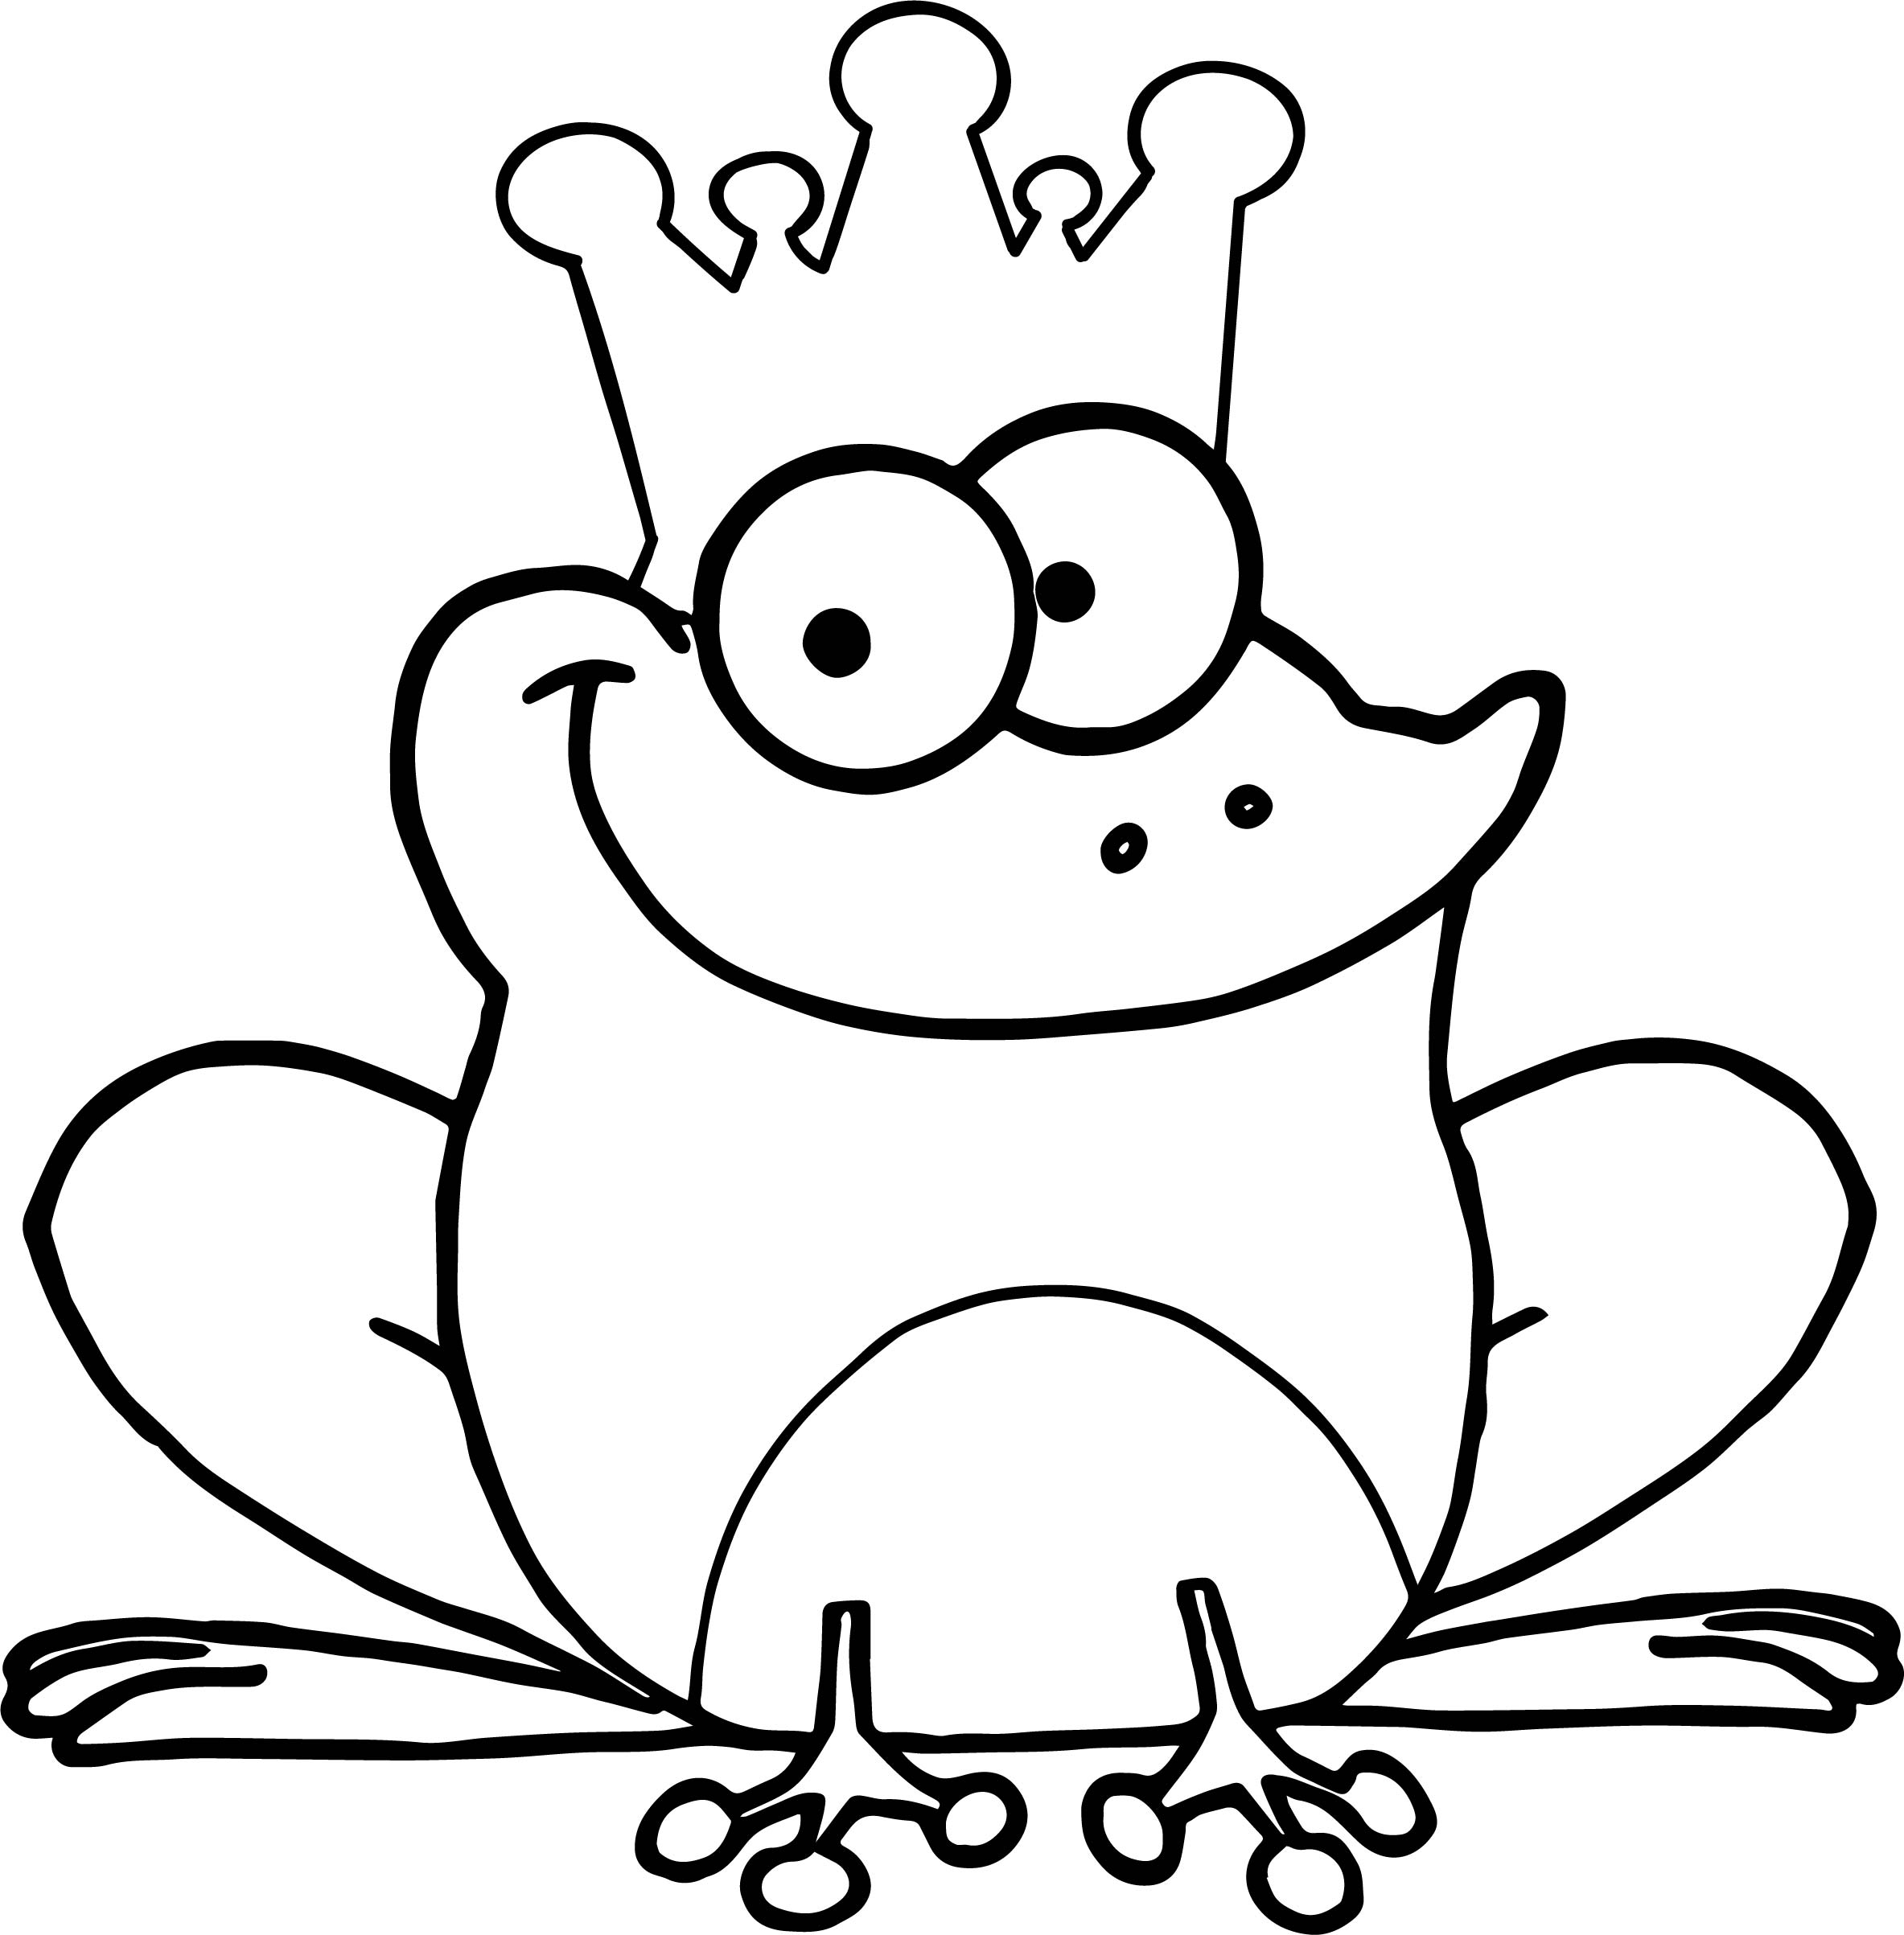 Tree Frog Coloring Pages | Free download on ClipArtMag